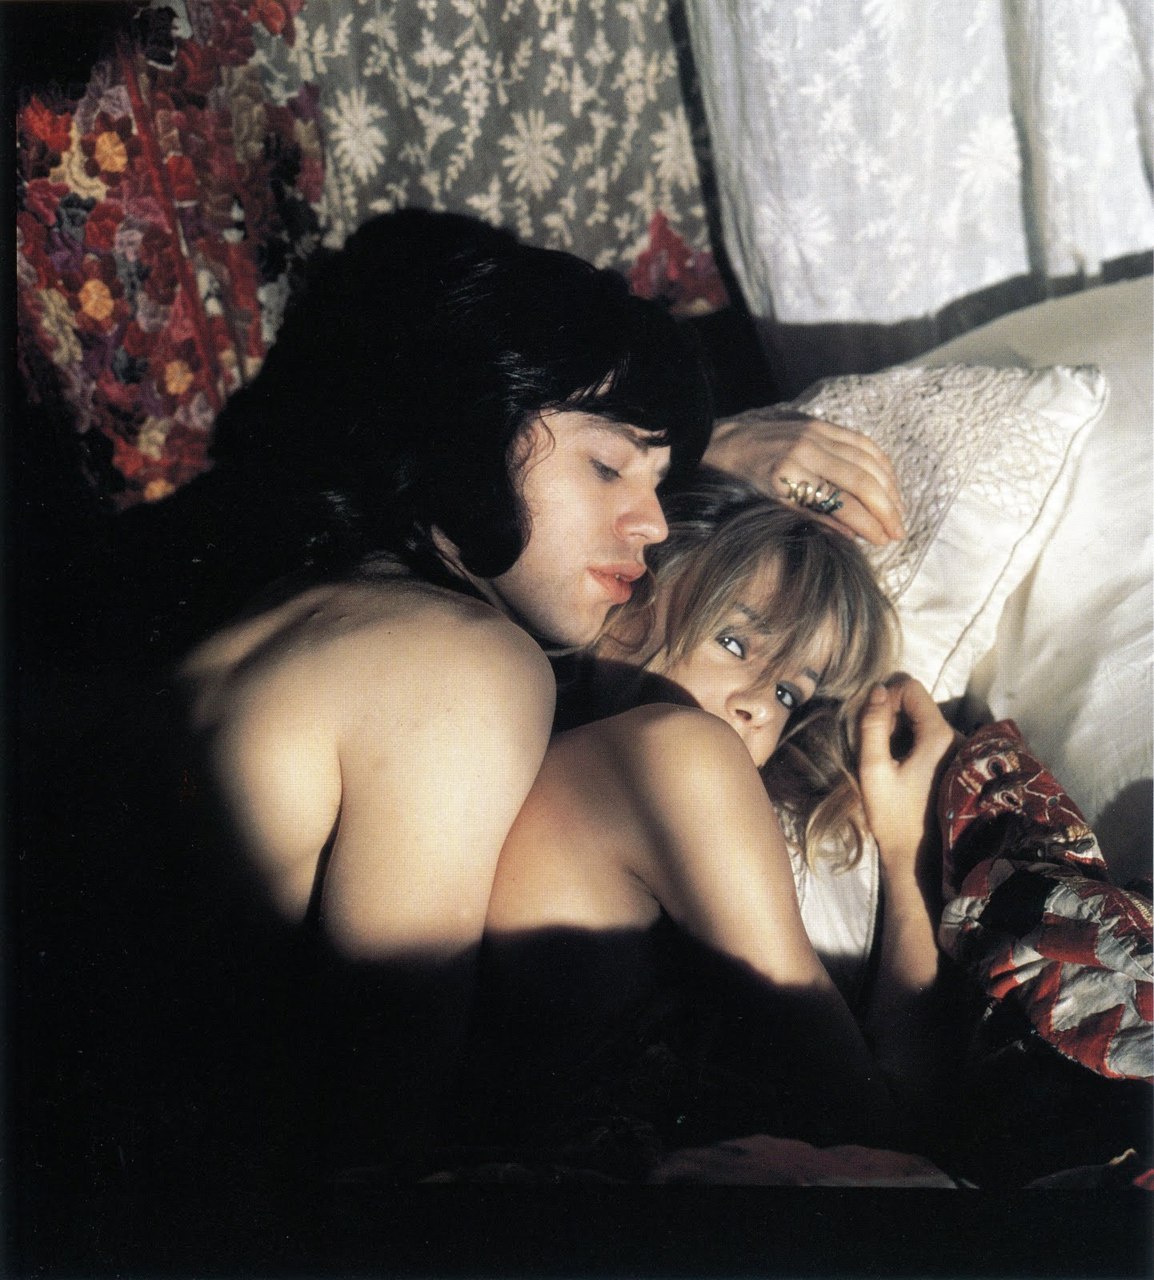 thegoldenyearz:
“Mick Jagger and Anita Pallenberg in Performance directed by Donald Cammell and Nicolas Roeg, 1968
”